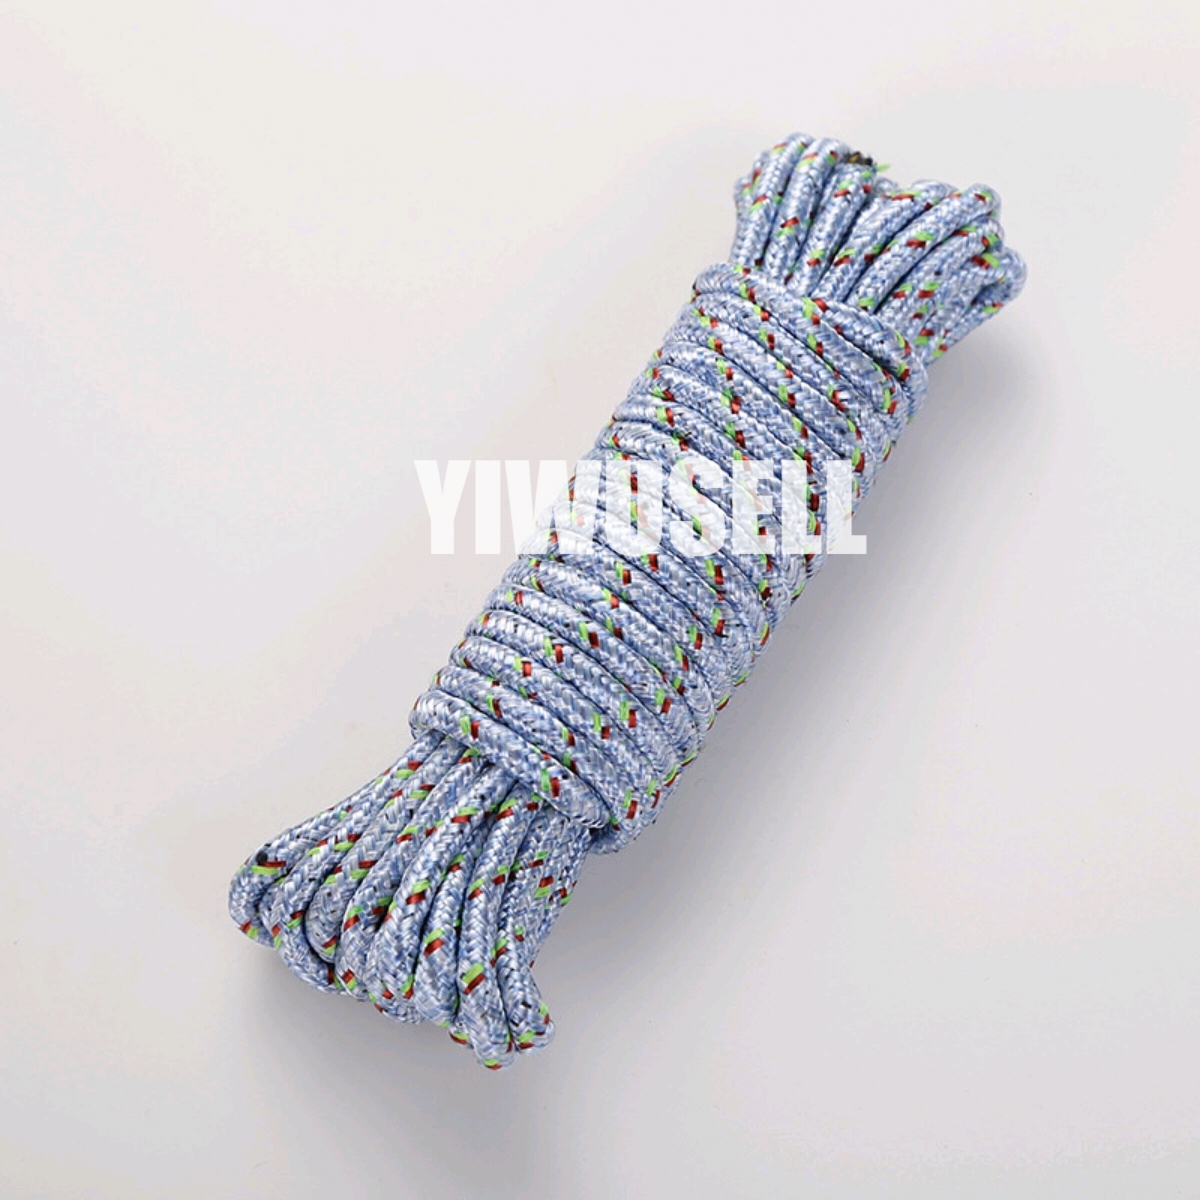 https://yiwusell.cn/wp-content/uploads/2023/03/Best-Nylon-Clothesline-Multifunction-Rope-10M-for-sale-03-yiwusell.cn_.jpg